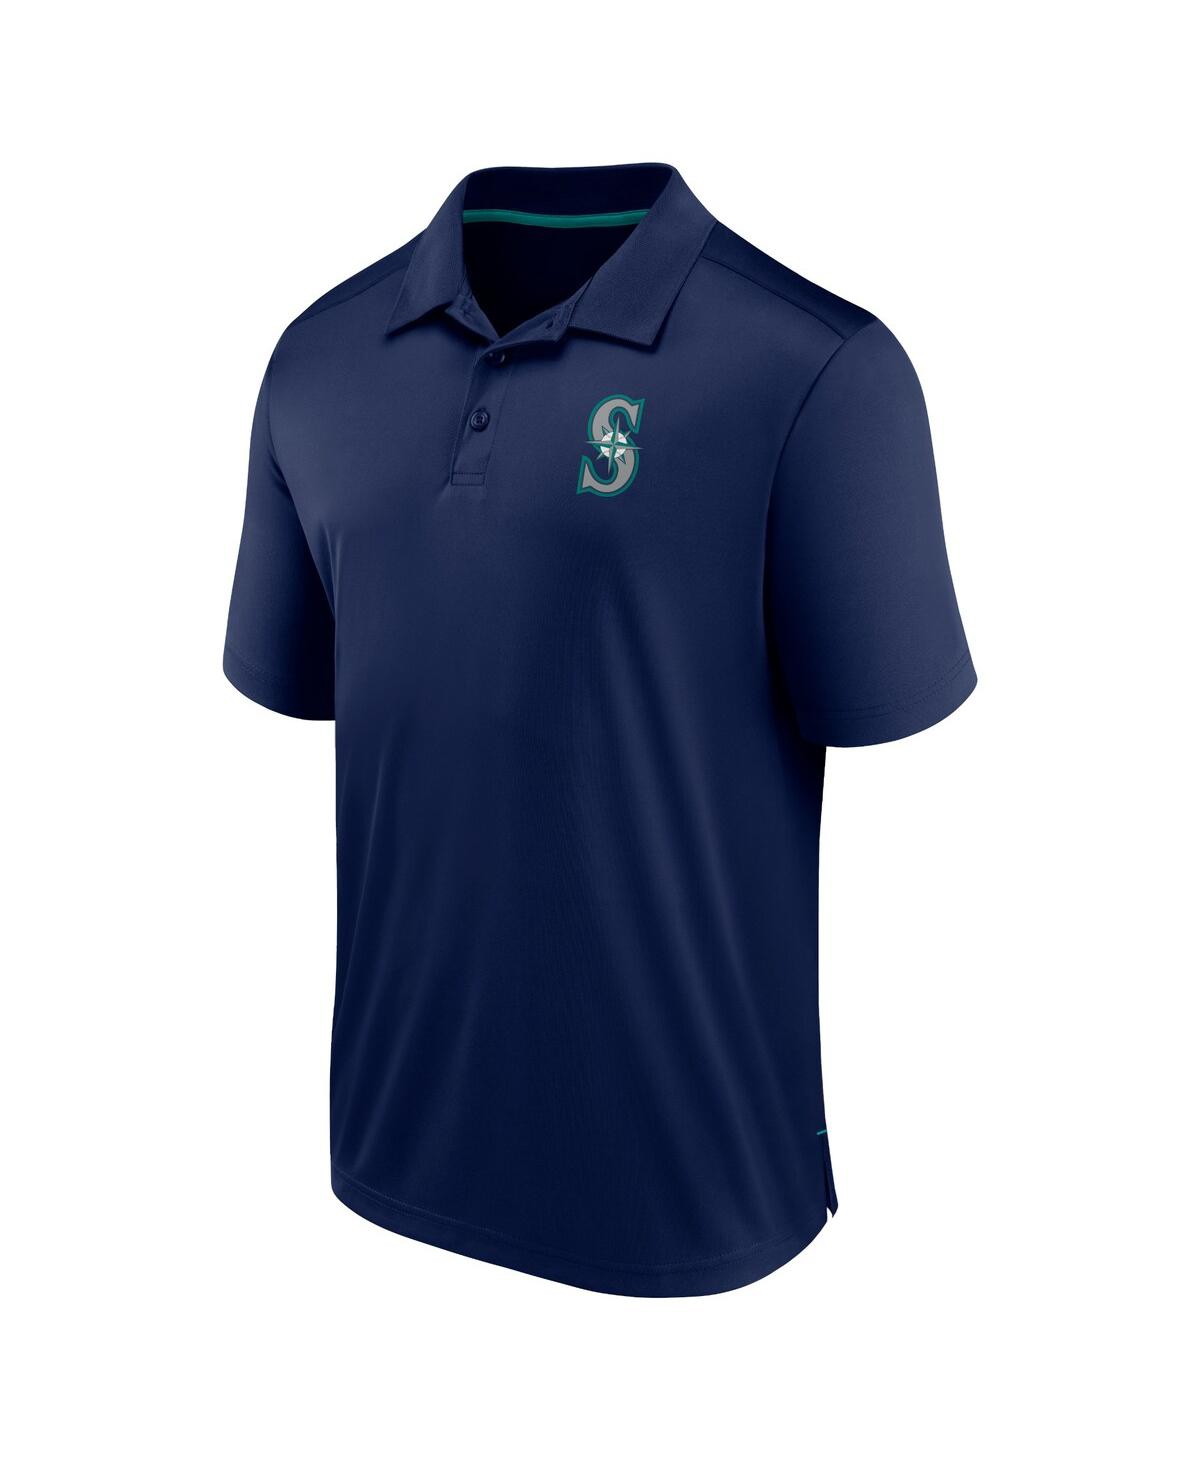 Shop Fanatics Men's  Navy Seattle Mariners Fitted Polo Shirt